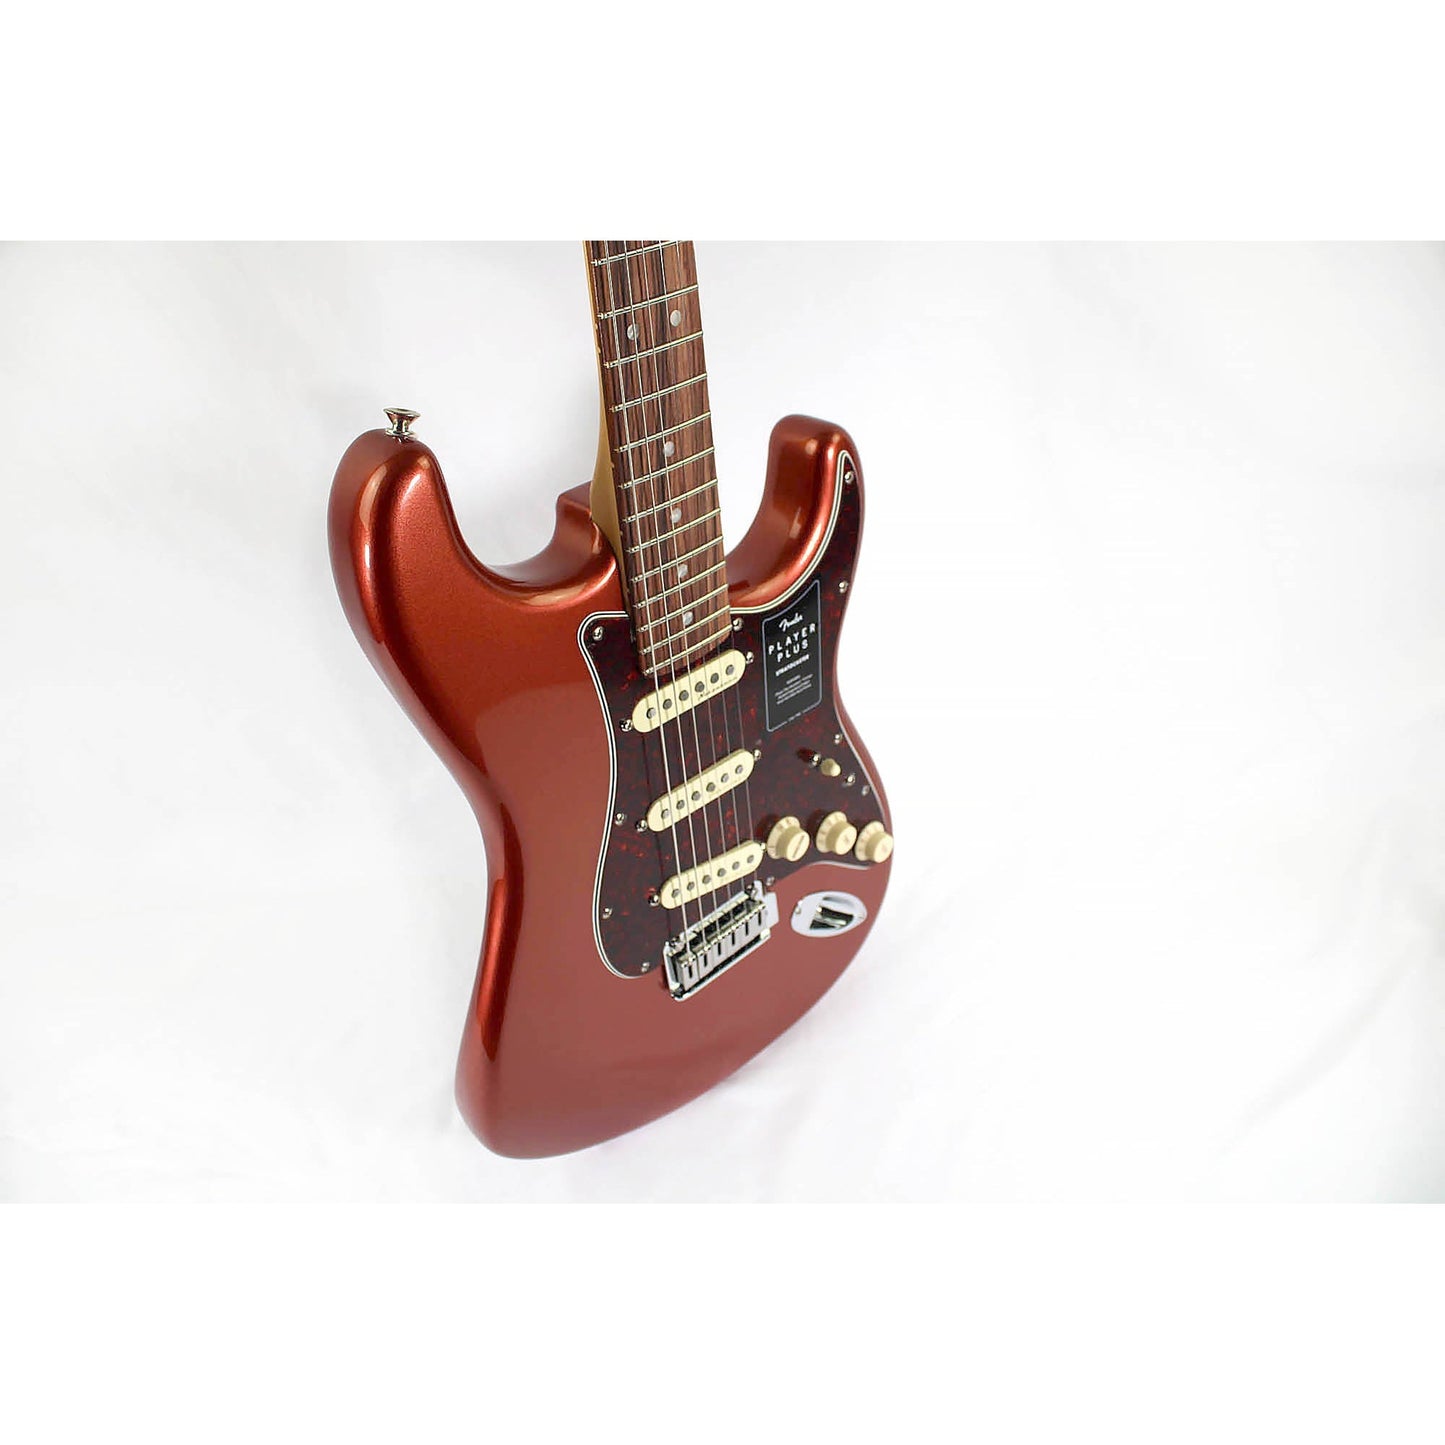 Fender Player Plus Stratocaster - Aged Candy Apple Red - Leitz Music-885978742301-0147312370